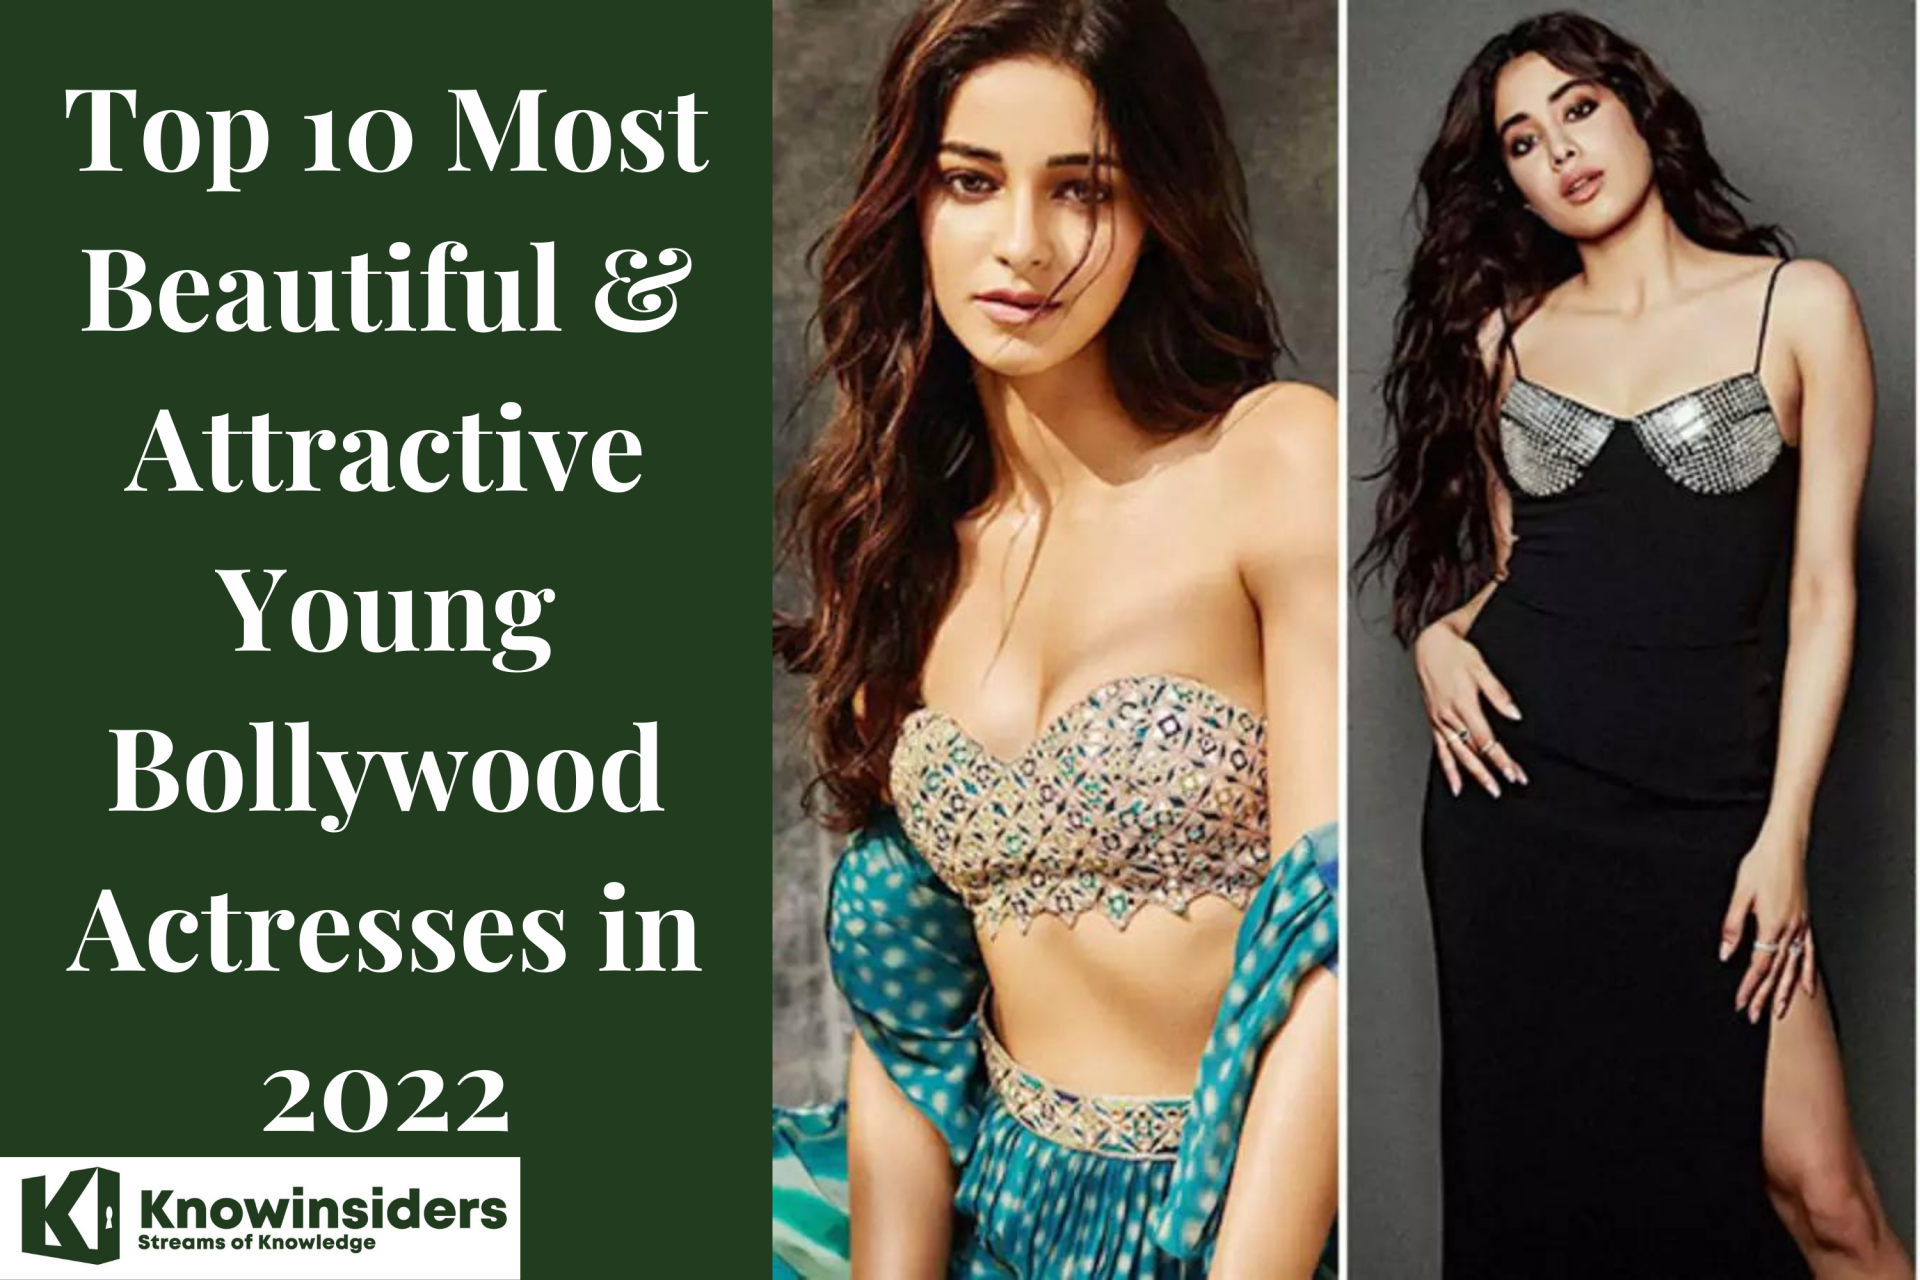 top 10 most beautiful attractive young bollywood actresses 20222023